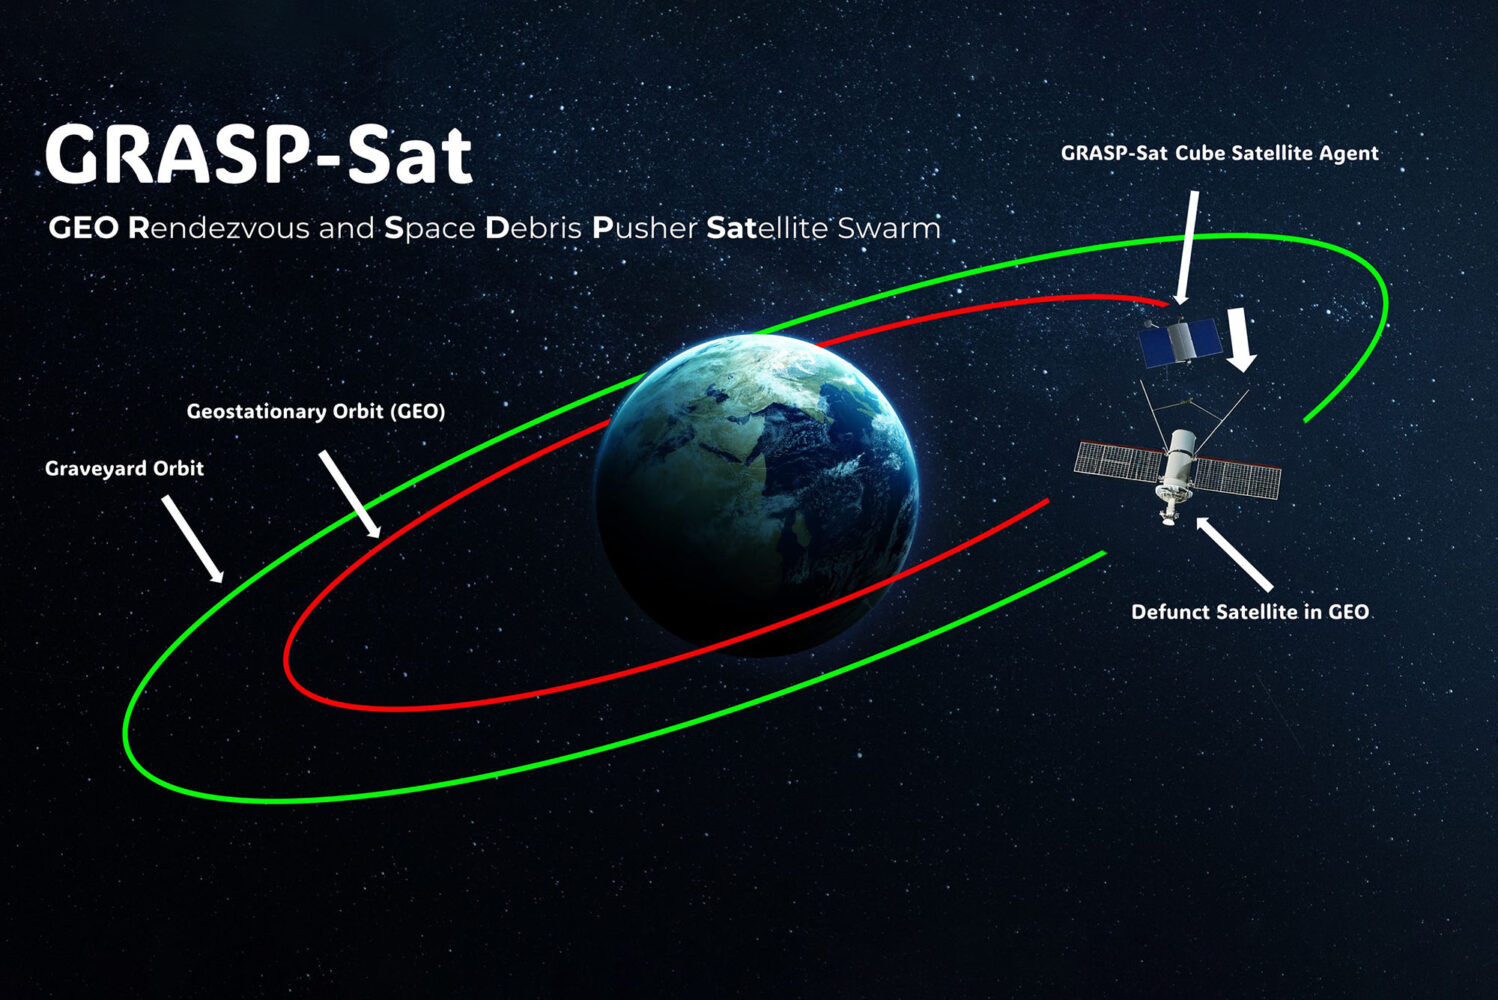 Photo: A graph of Earth's orbit with stars surrounding it and a satellite nearby. The text on the image says "GRASP-Sat" and there are arrows pointing out the Graveyard Orbit, Geostationary Orbit (GEO), GRASP-Sat Cube Satellite Agent, and a defunct satellite in GEO